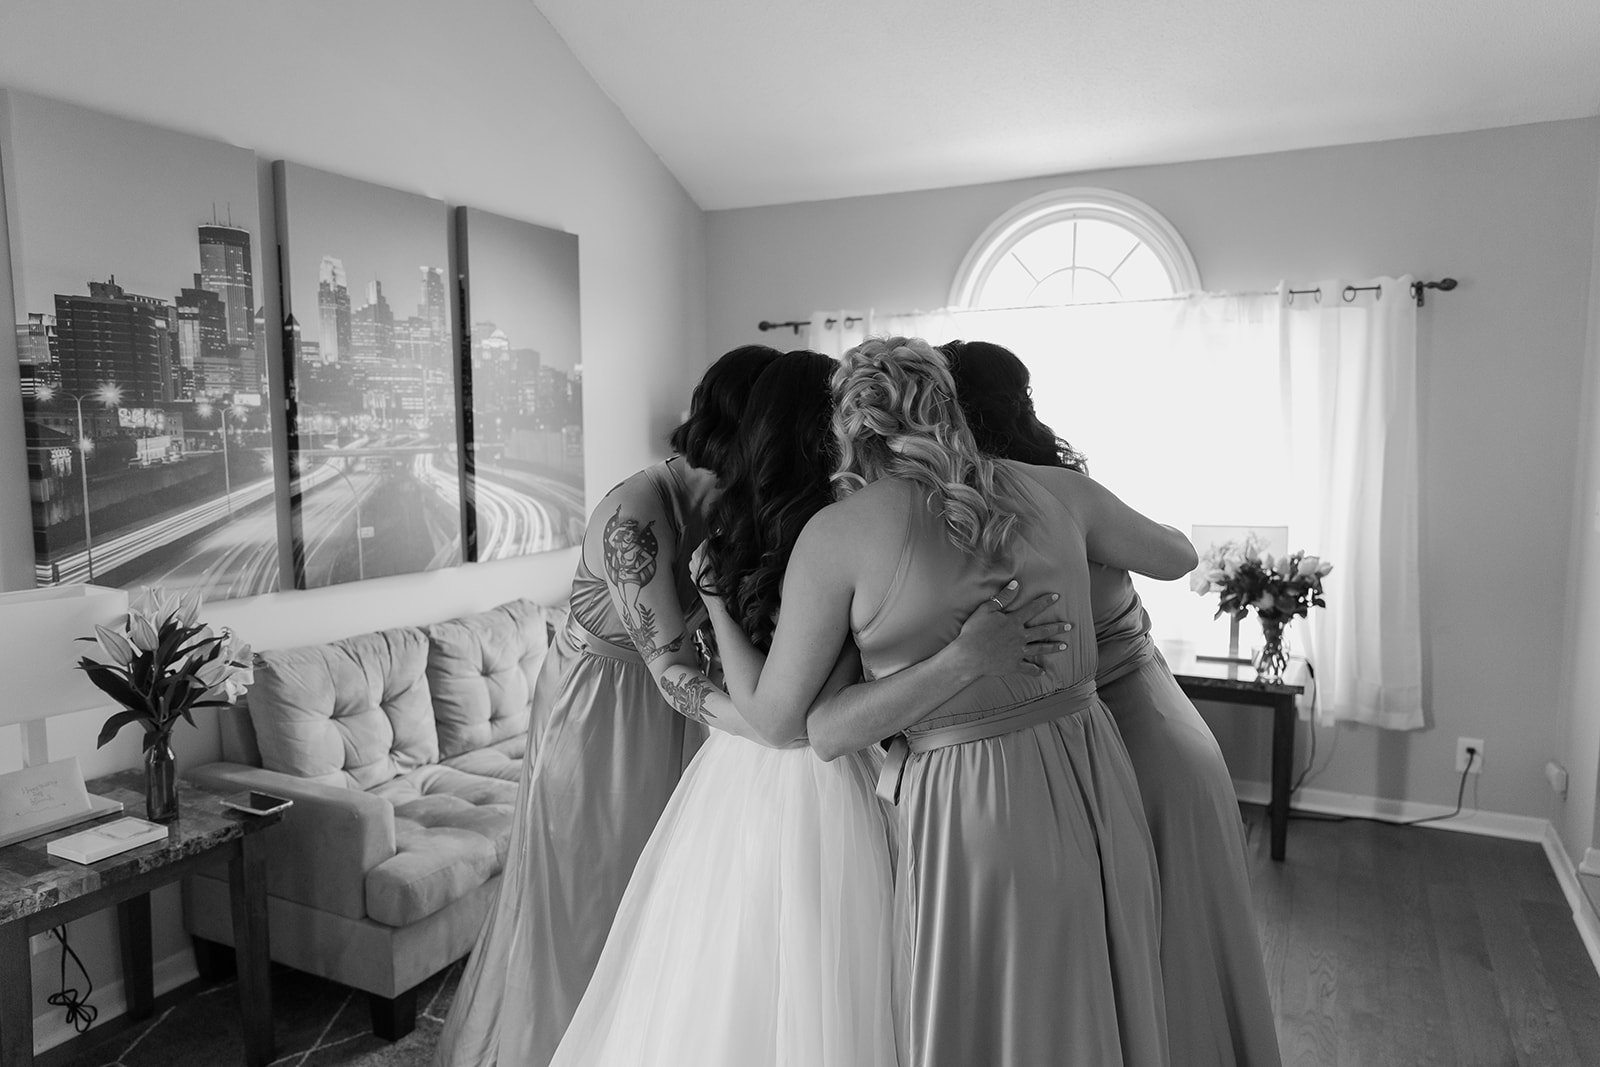 Bride and her bridesmaids share a group hug